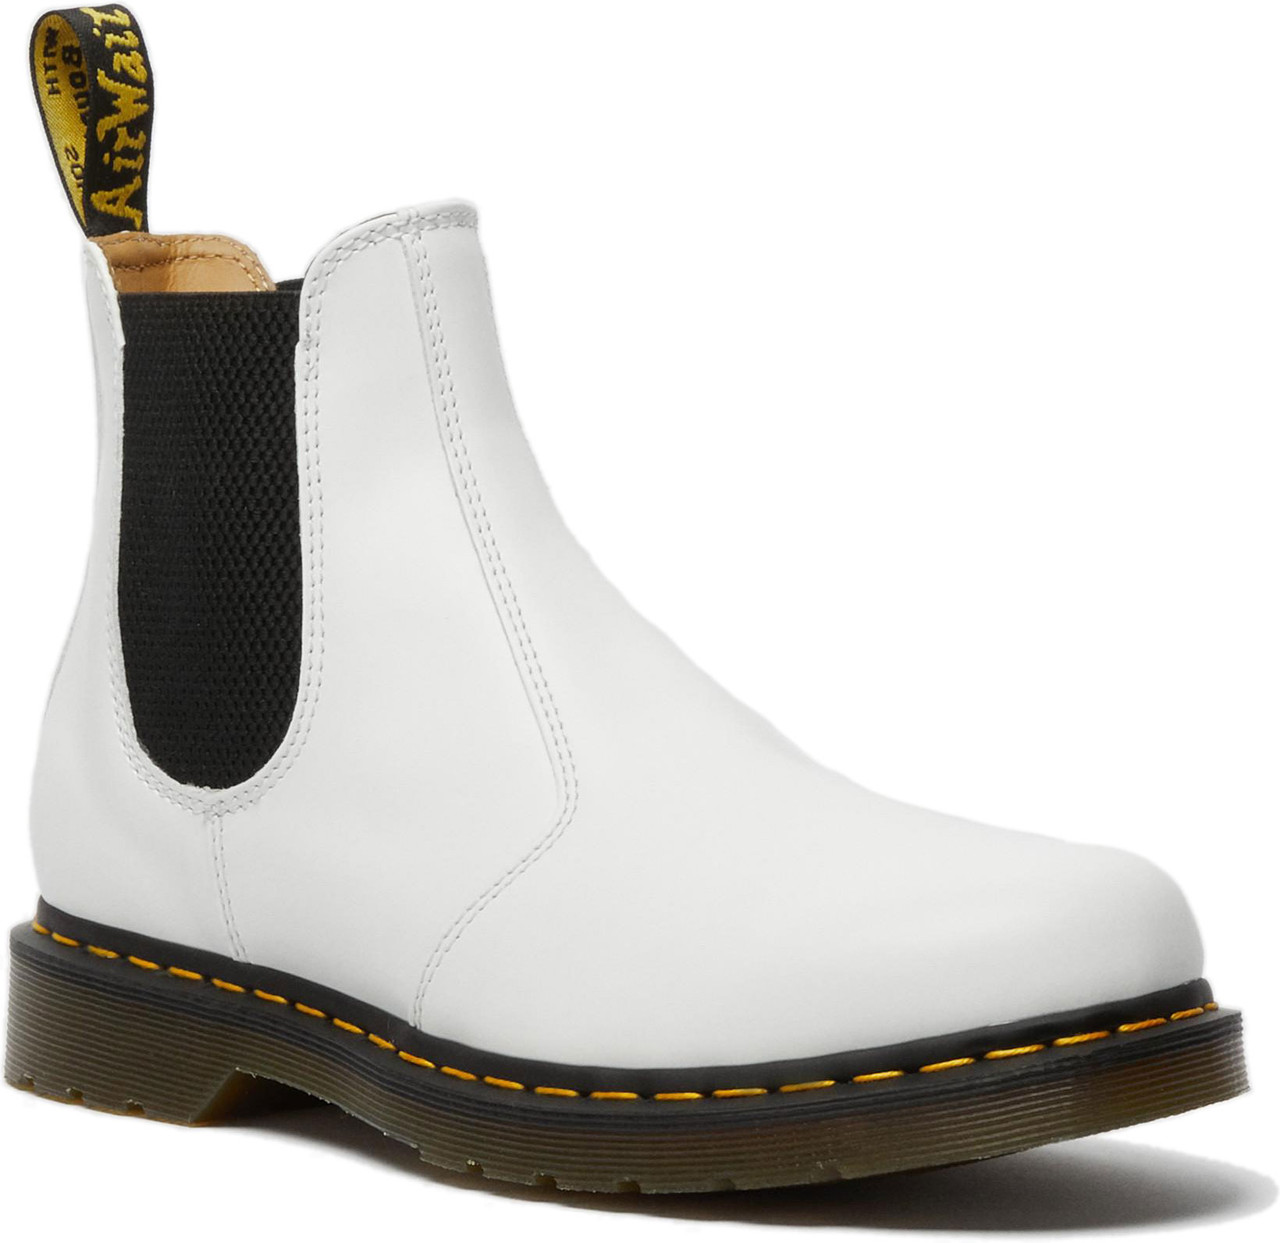 Guinness øve sig konkurrerende Dr. Martens Women's 2976 Yellow Stitch Smooth Leather Chelsea - FREE  Shipping & FREE Returns - Women's Boots